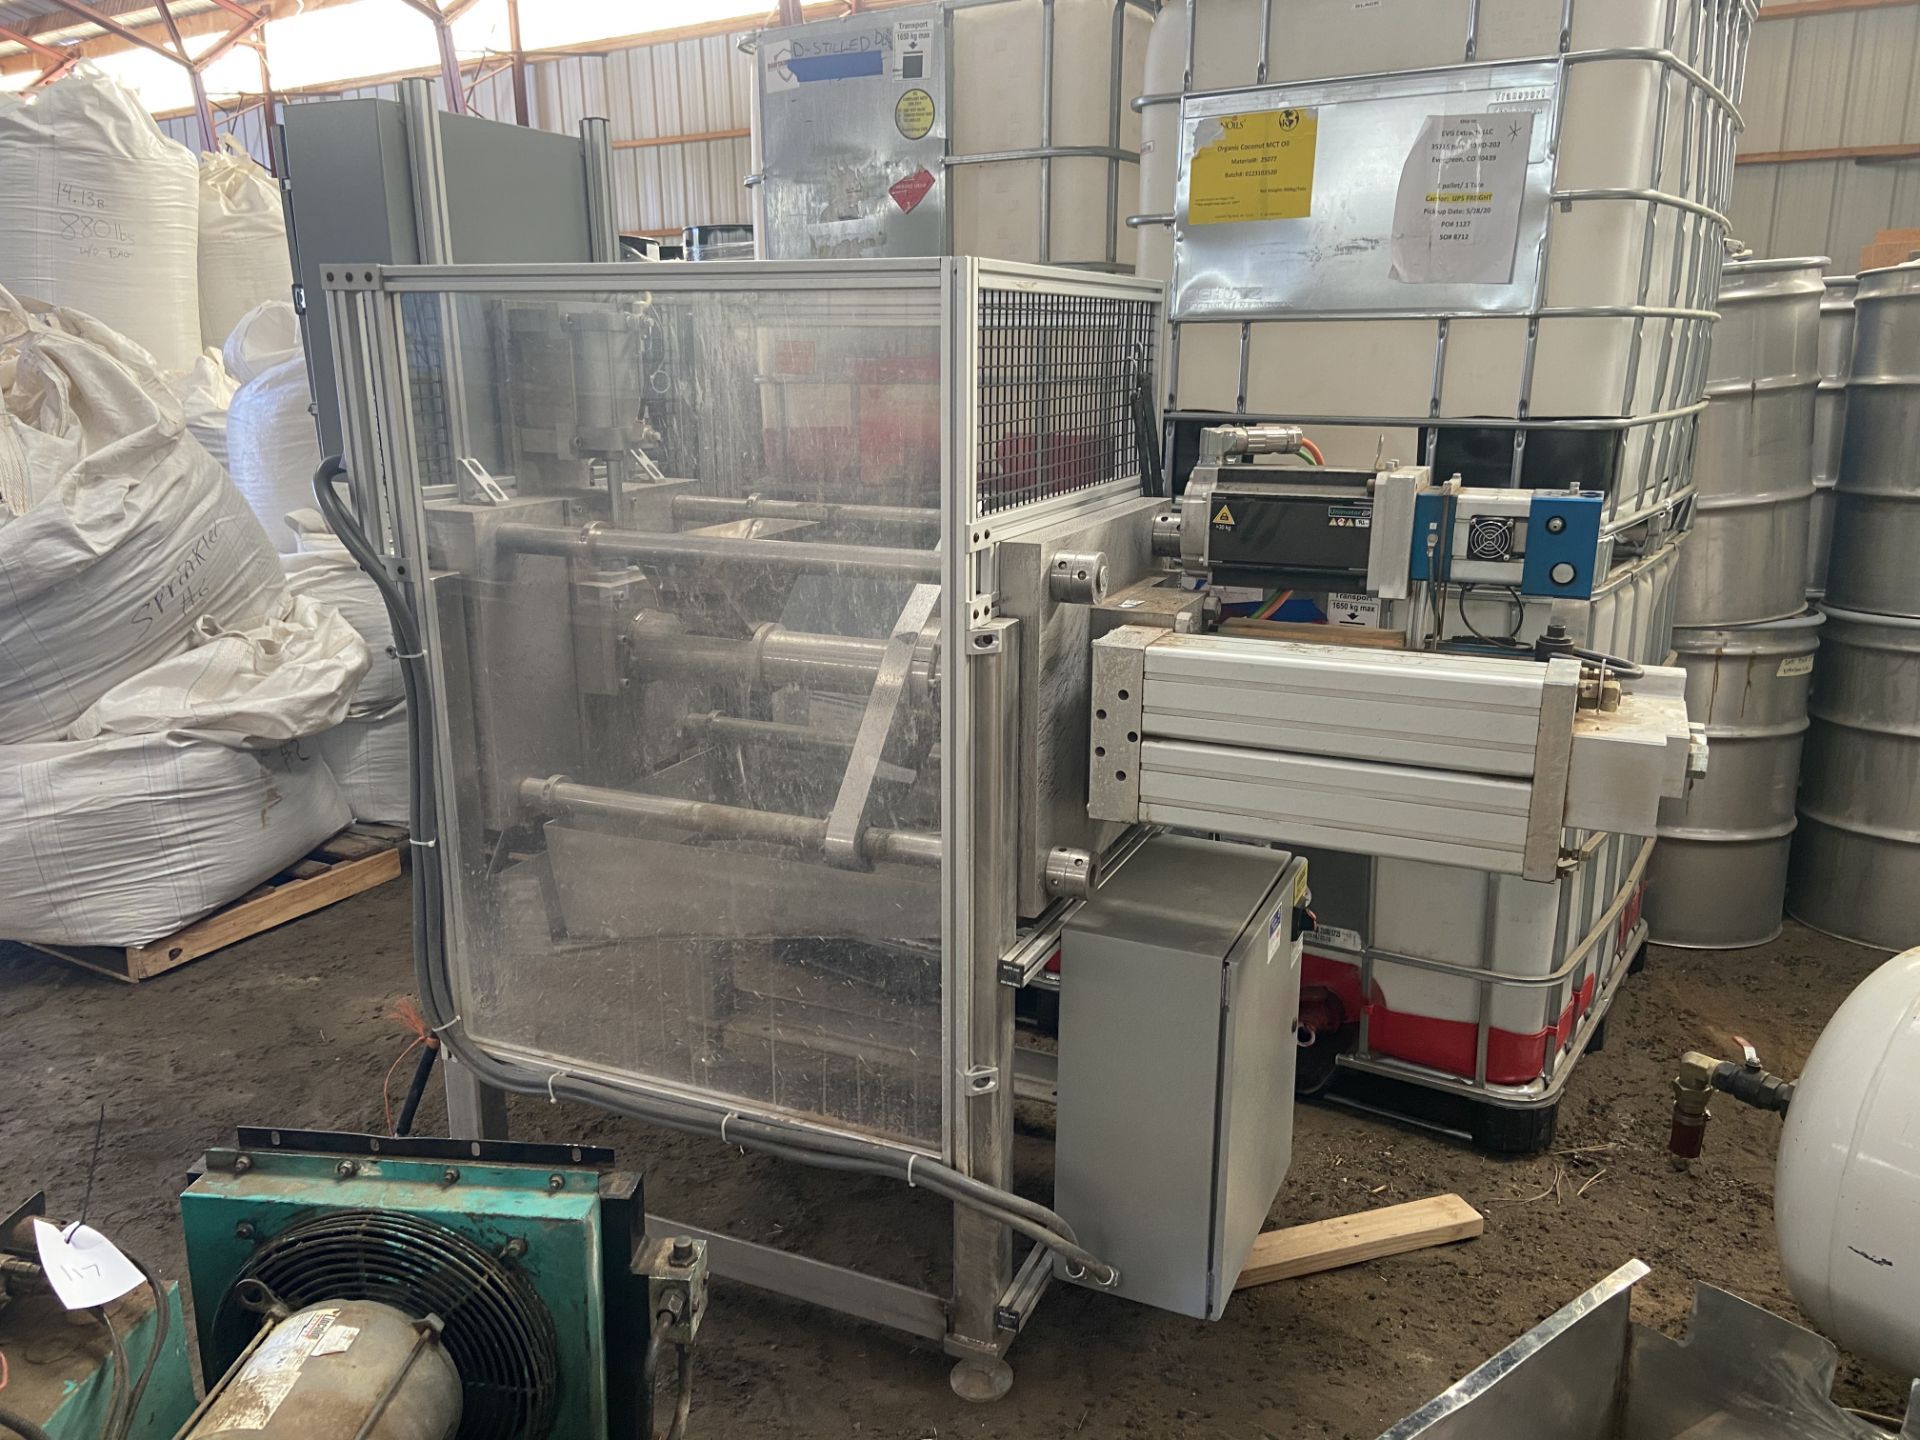 (Located in Conifer, CO) Kyntronics Hydraulic Actuator Press, Serial# 34187-01-001, Year 2019